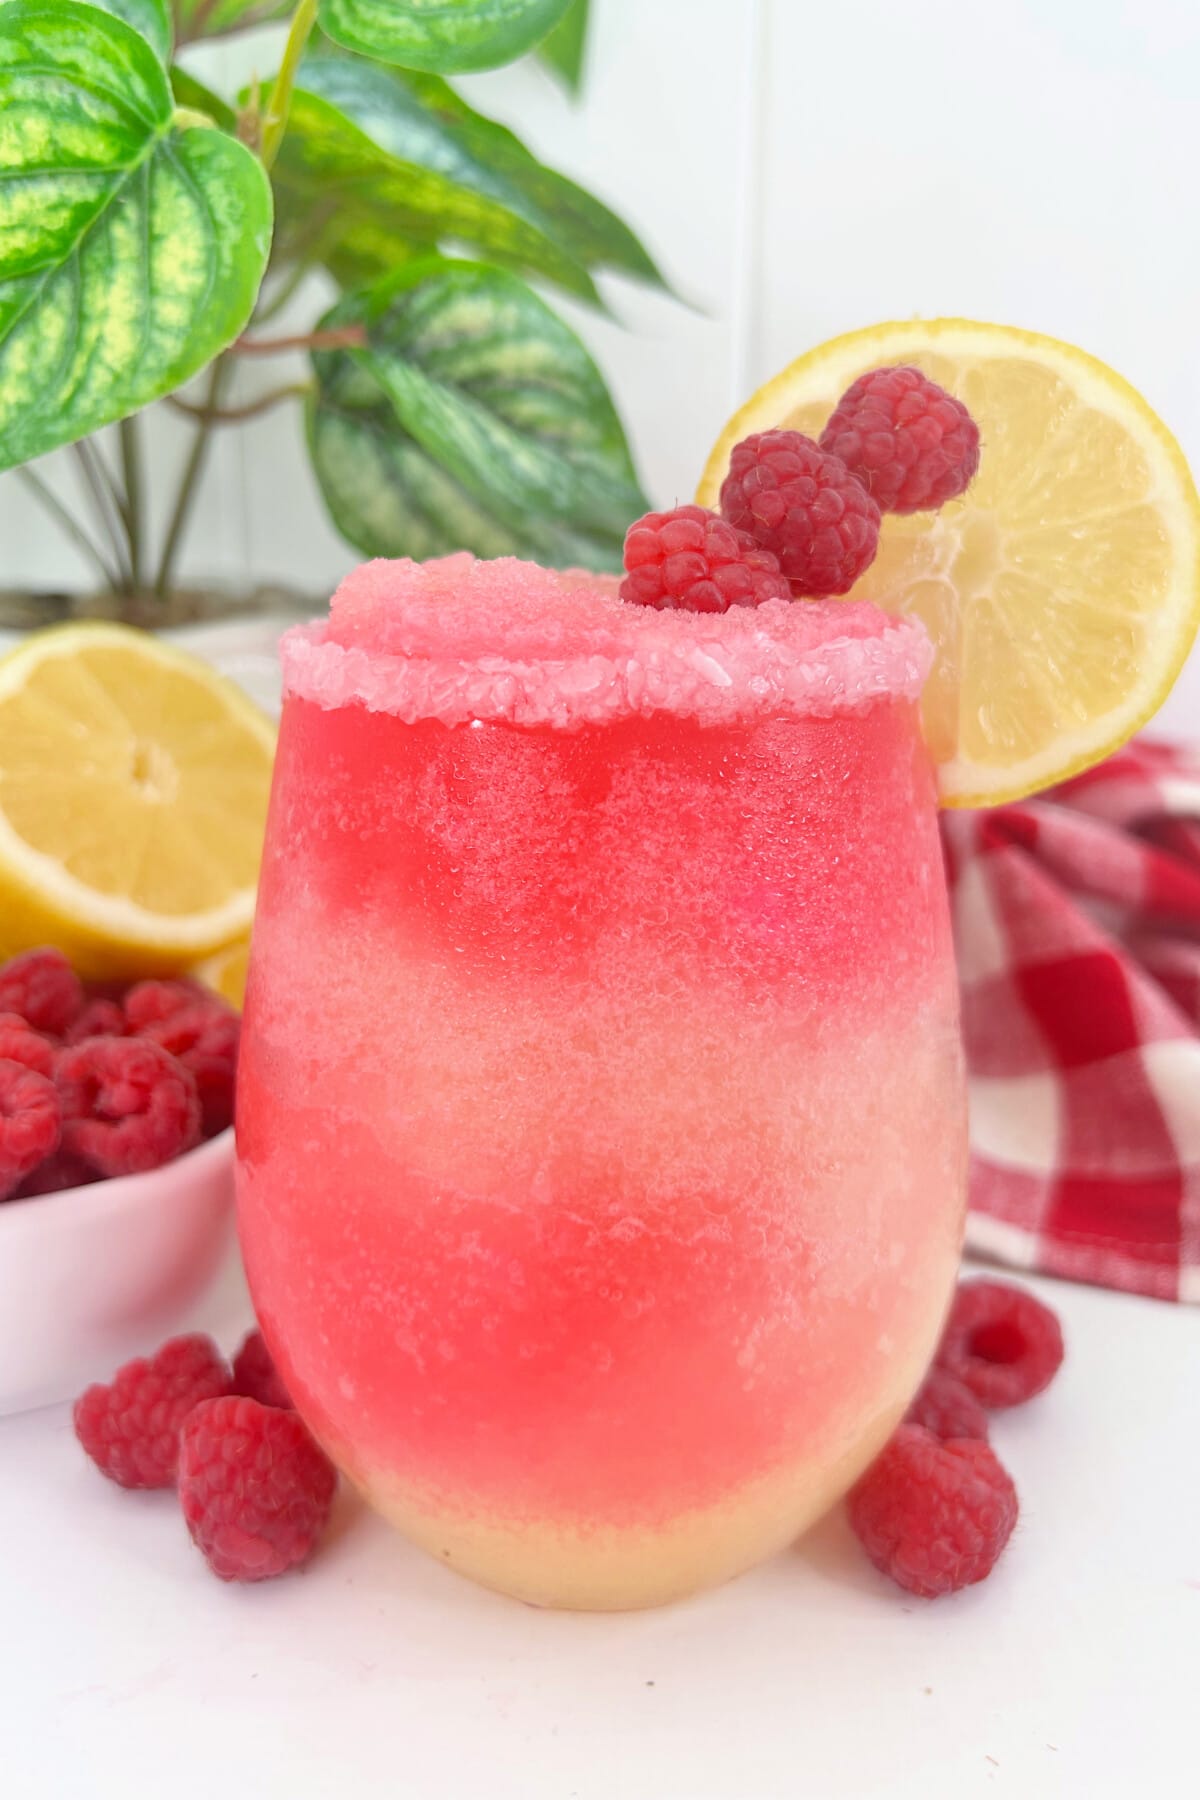 Raspberry Lemonade Cocktail topped with fresh fruit.
